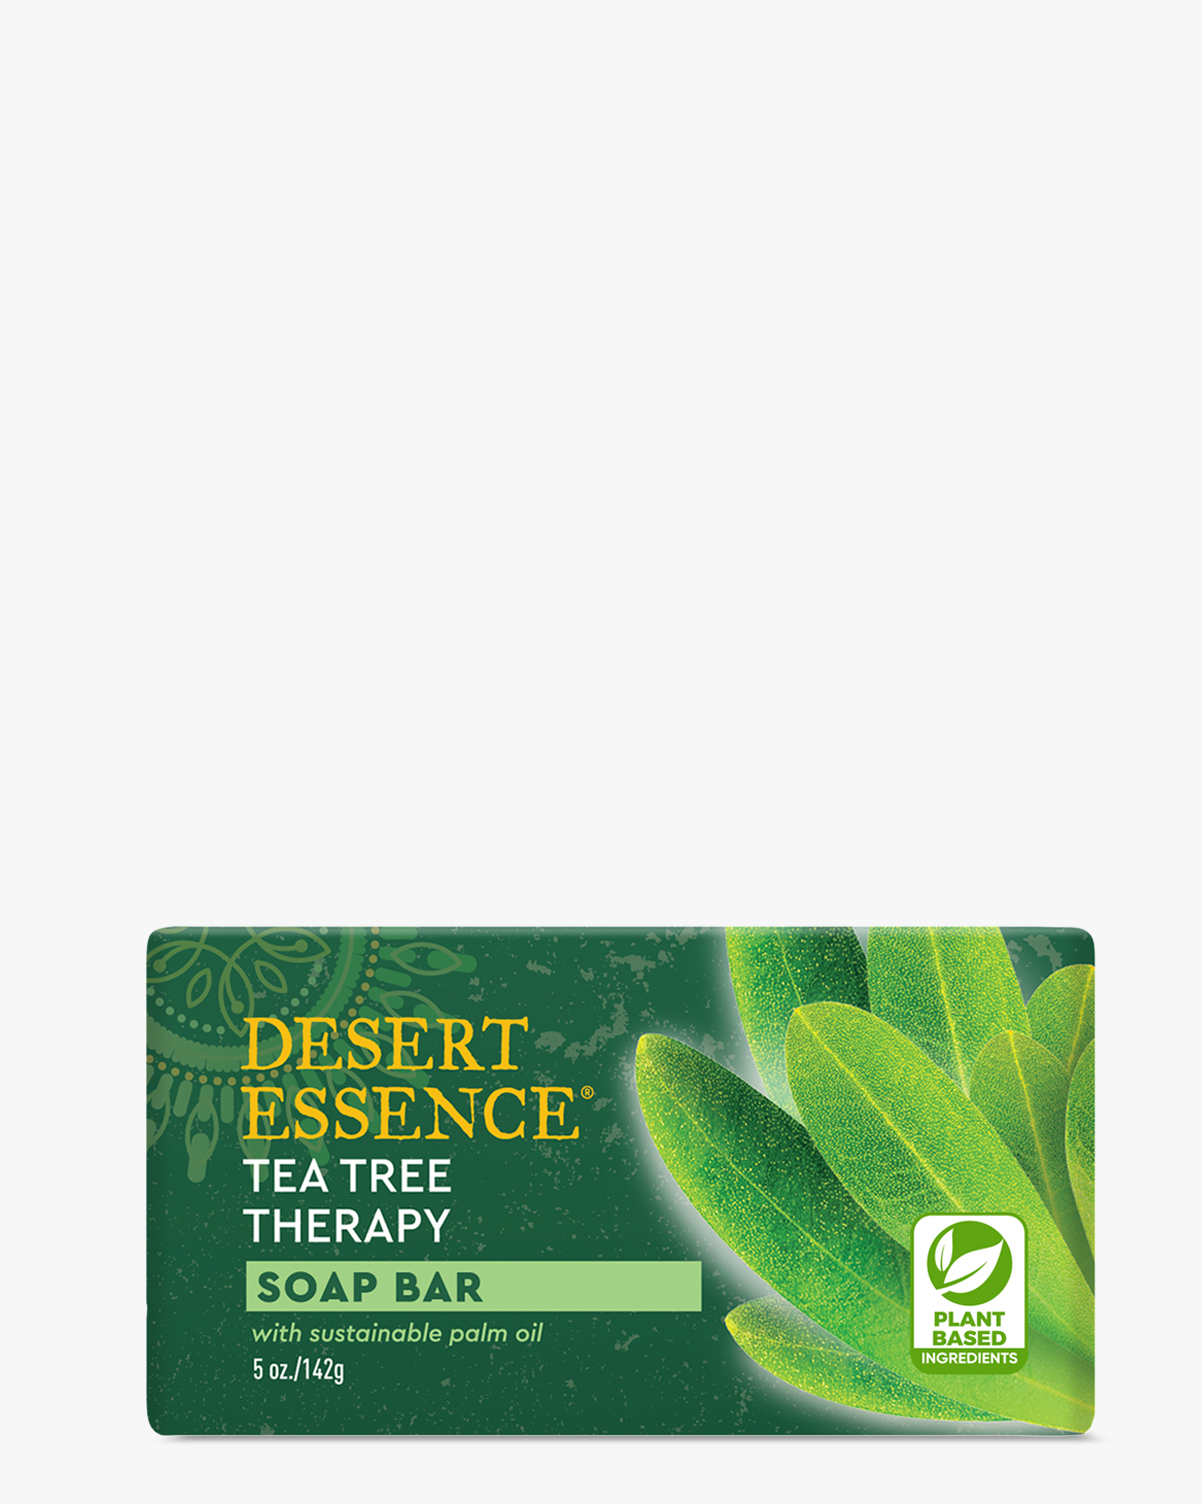 Desert Essence Cleansing Bar Soap Tea Tree Therapy